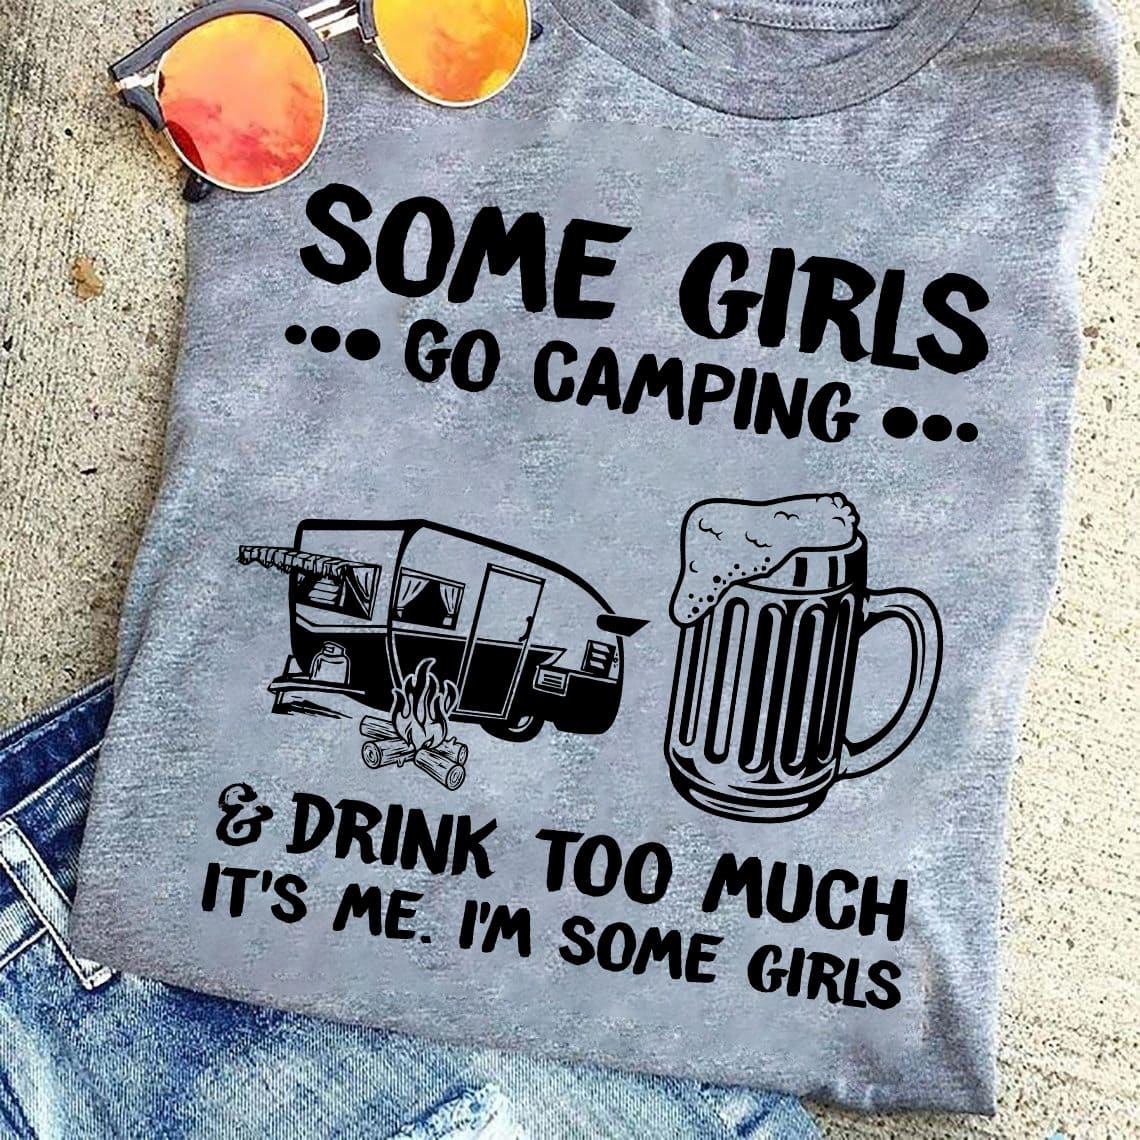 Some girls go camping, drink too much - Camping and drinking beer, recreational vehicle